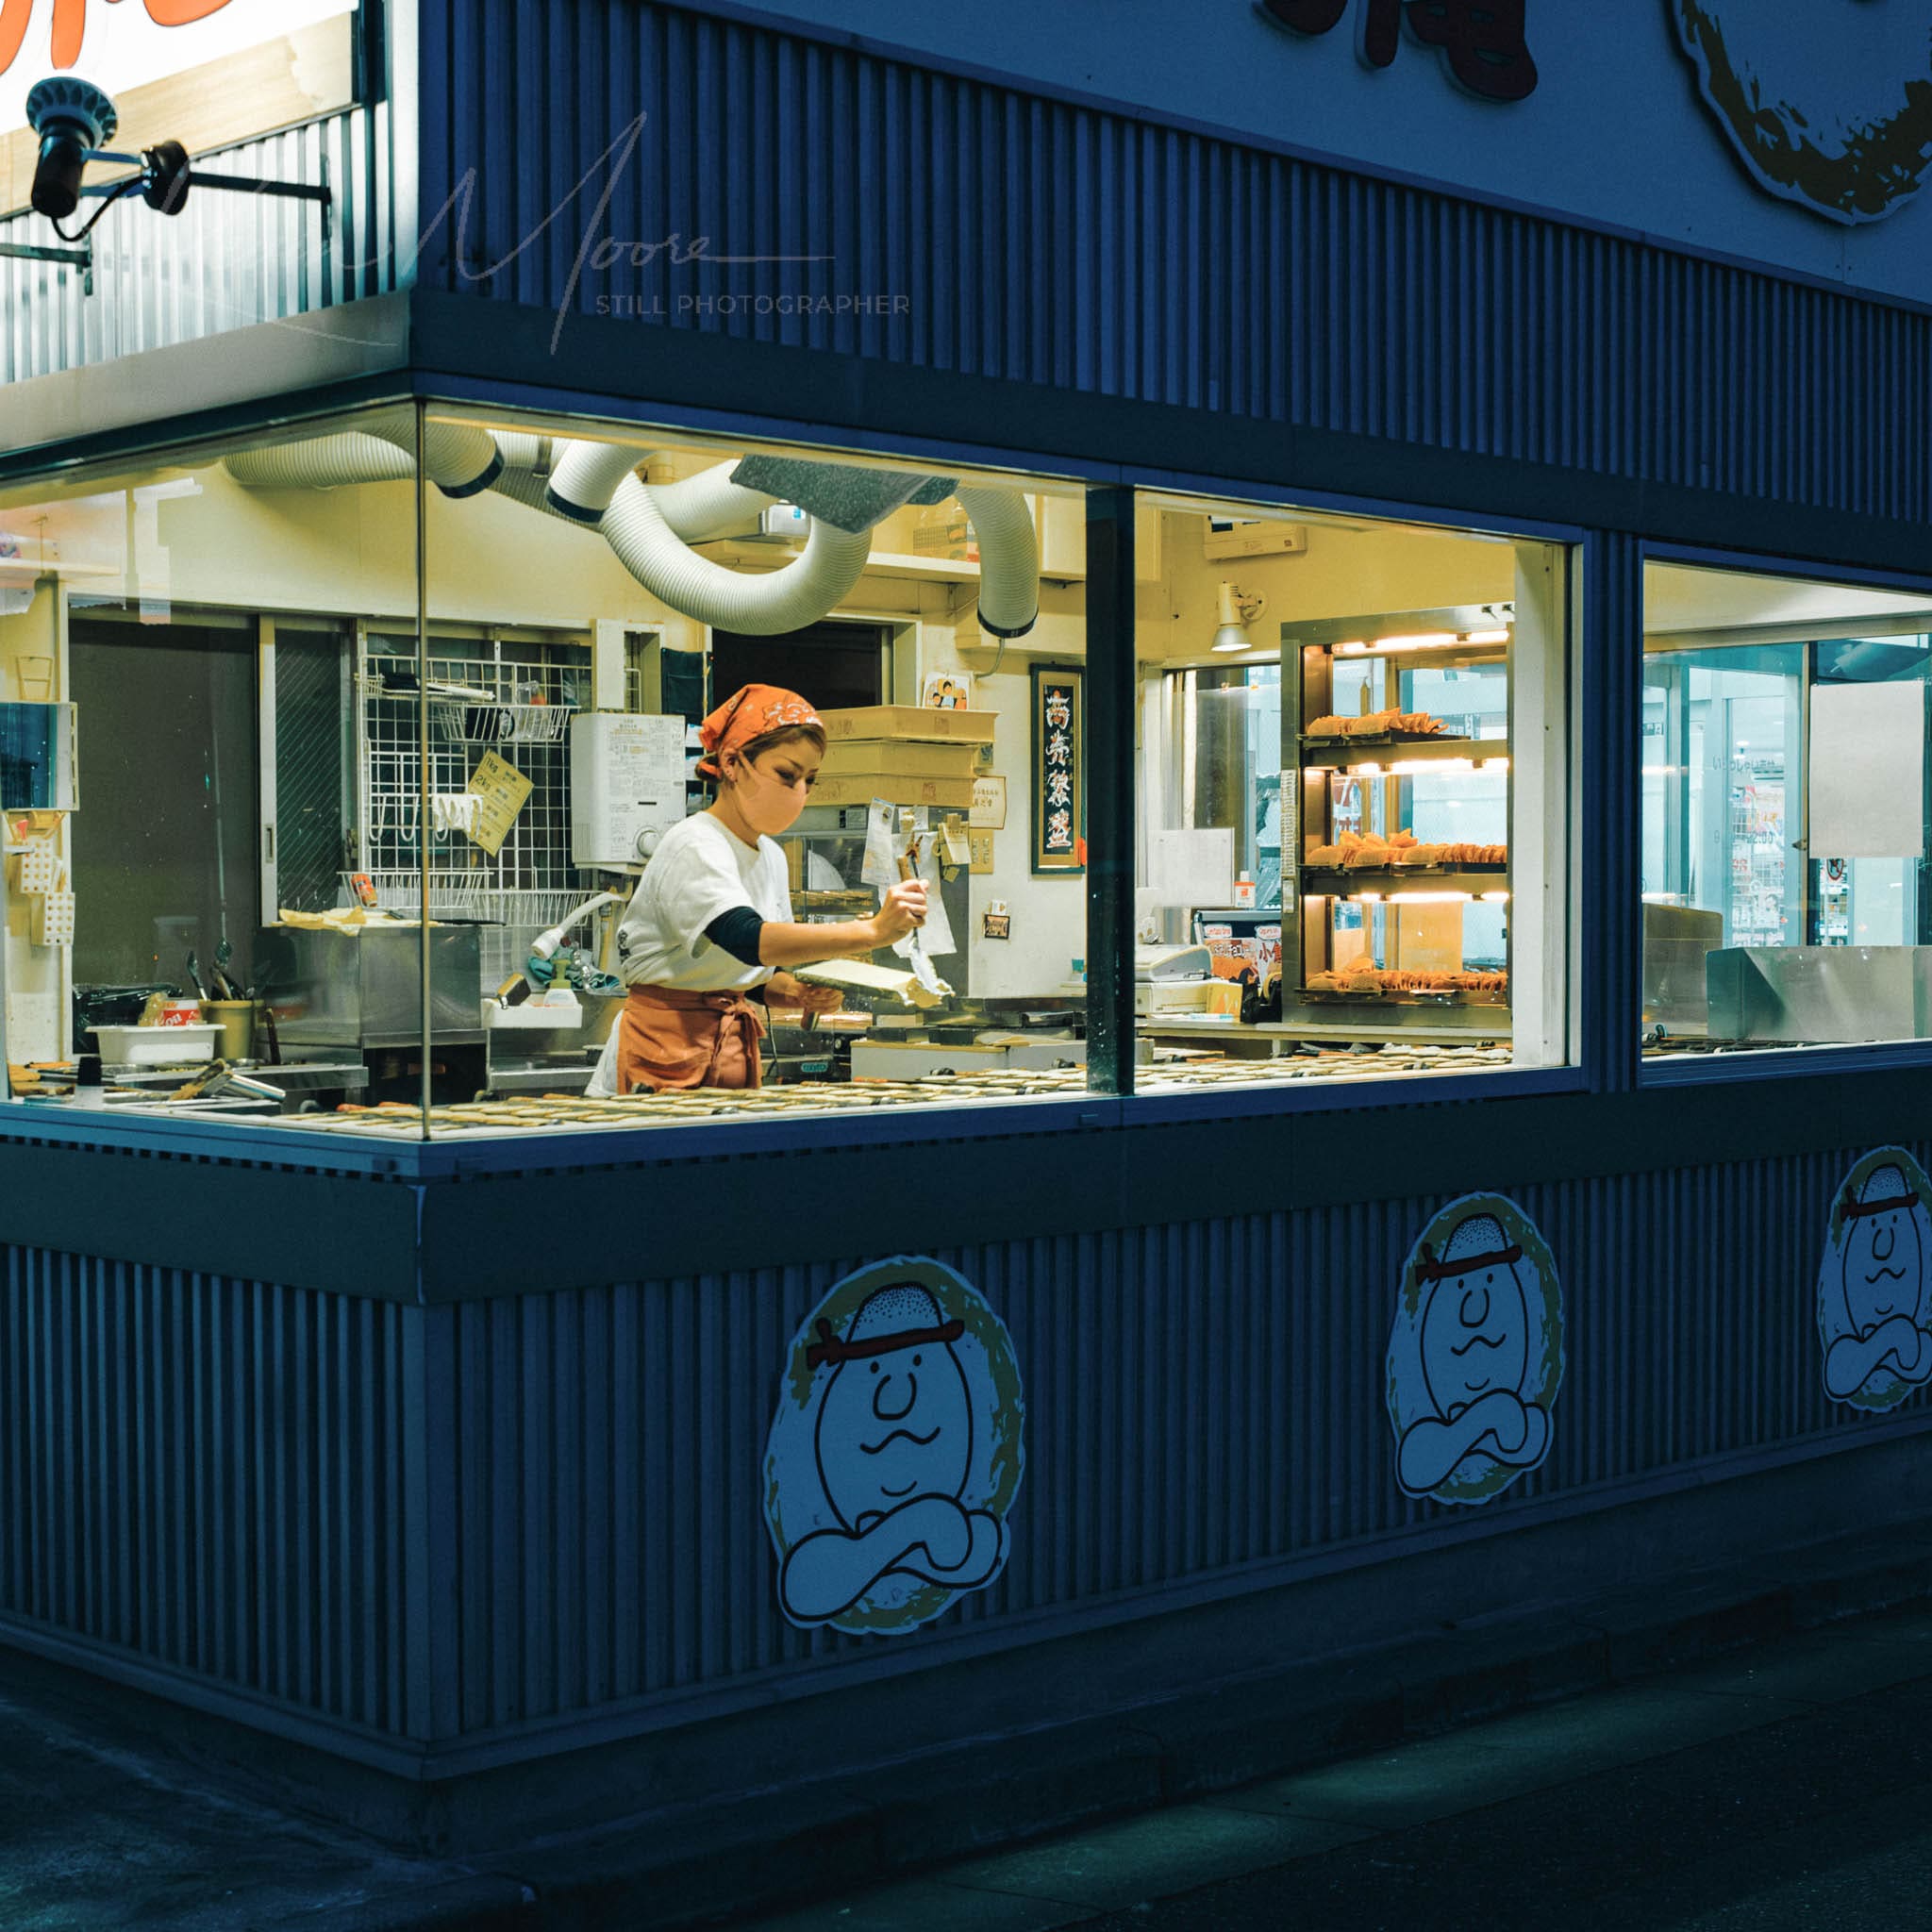 Evening bakery scene showing employee preparing food in a vintage-style, family-friendly diner.